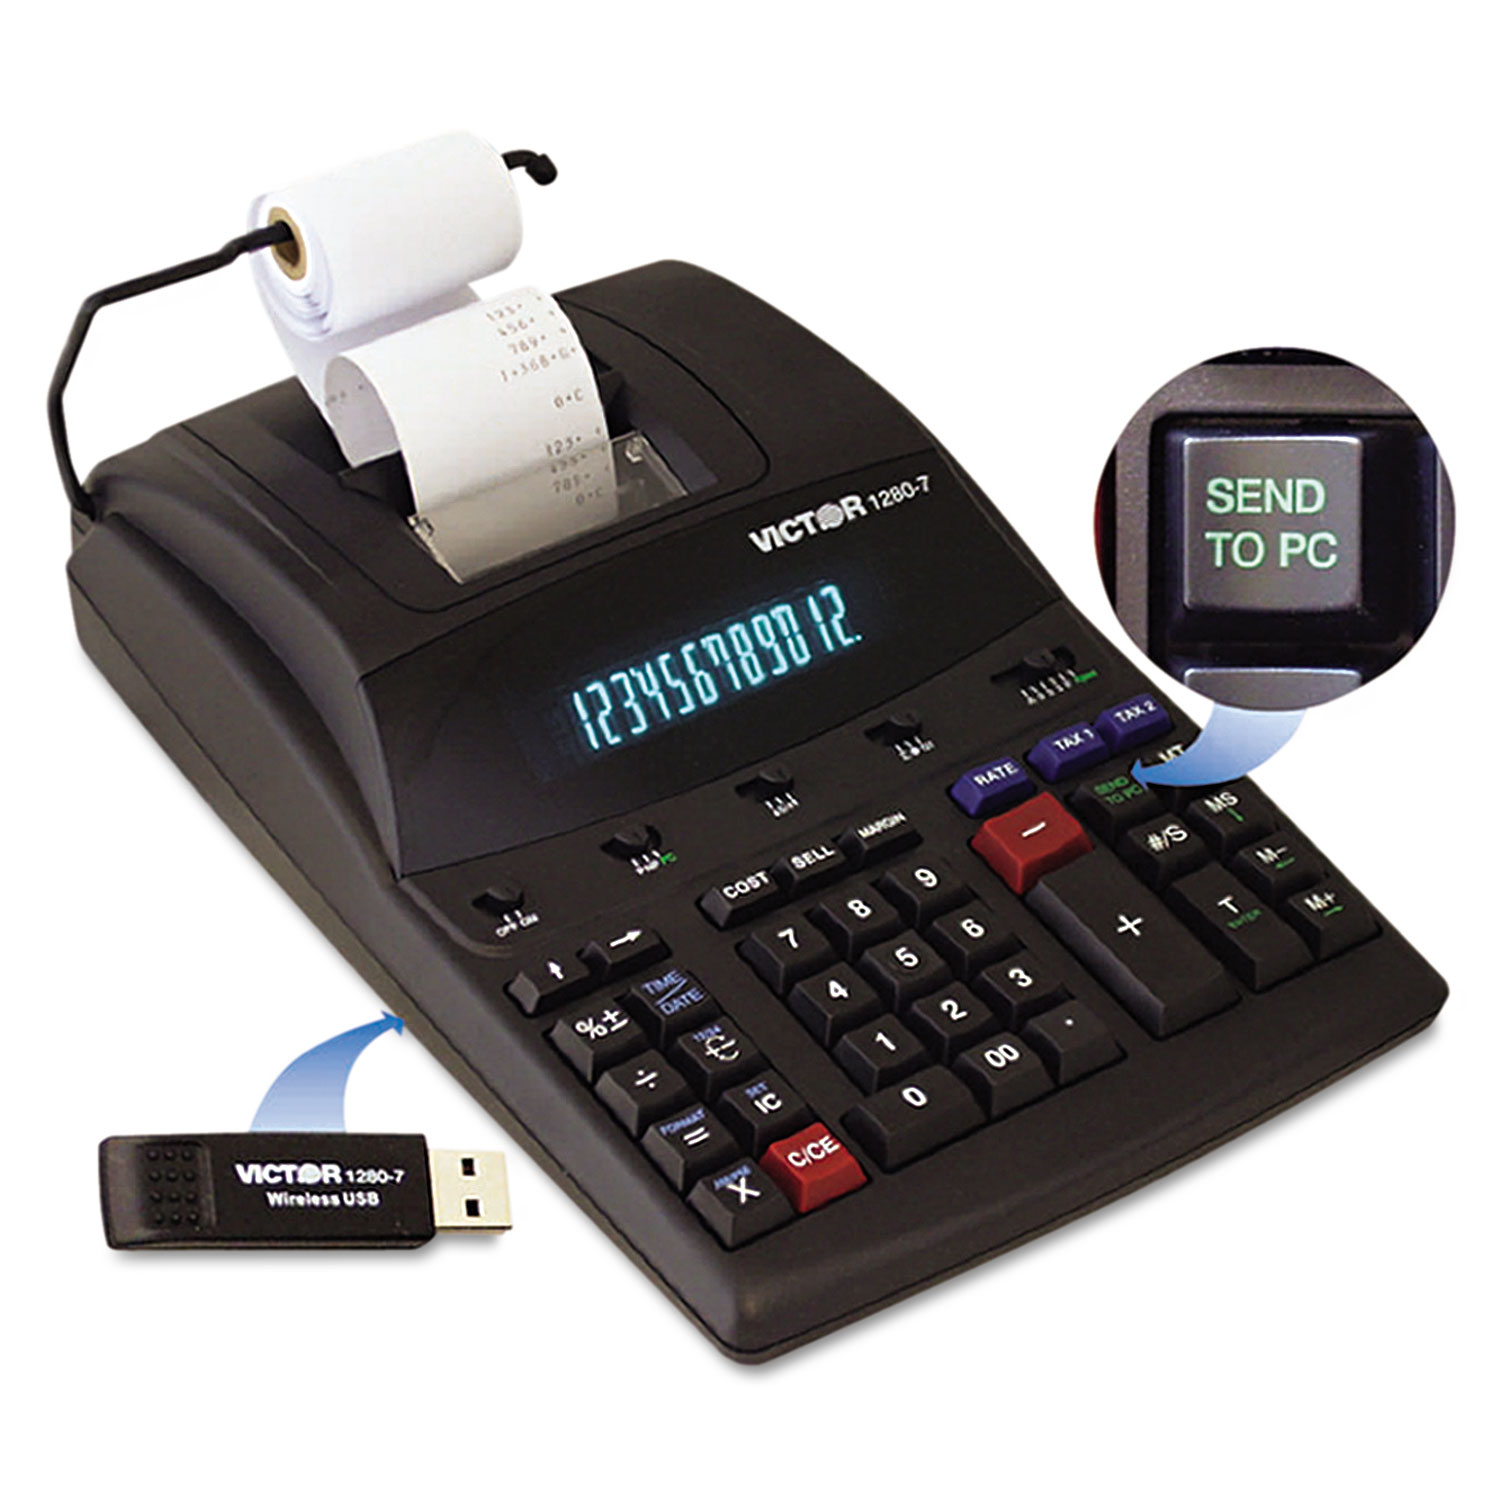 1280-7 Two-Color Printing Calculator w/USB, Black/Red Print, 4.6 Lines/Sec